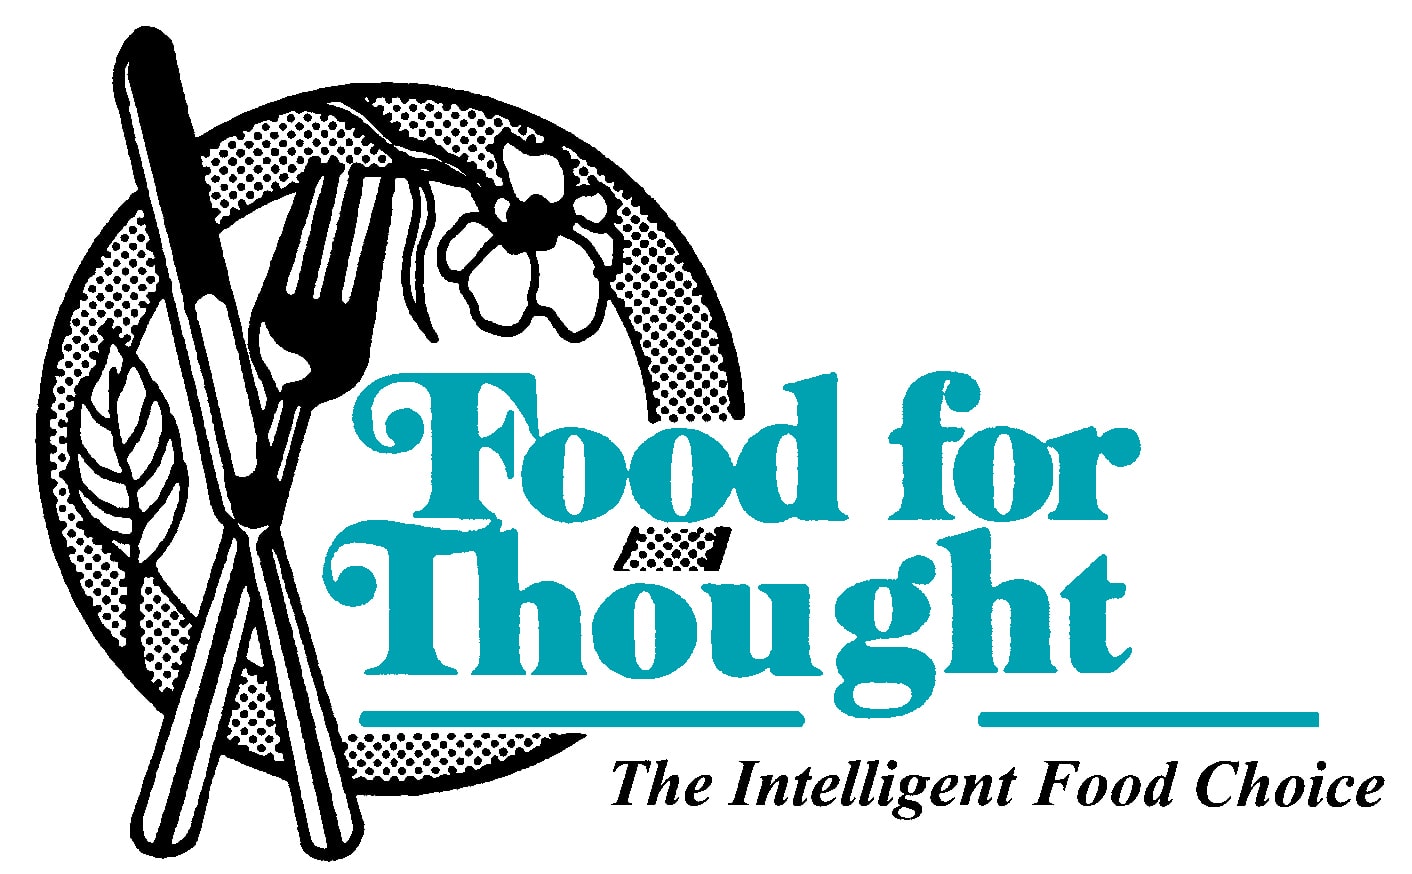 Food for Thought logo